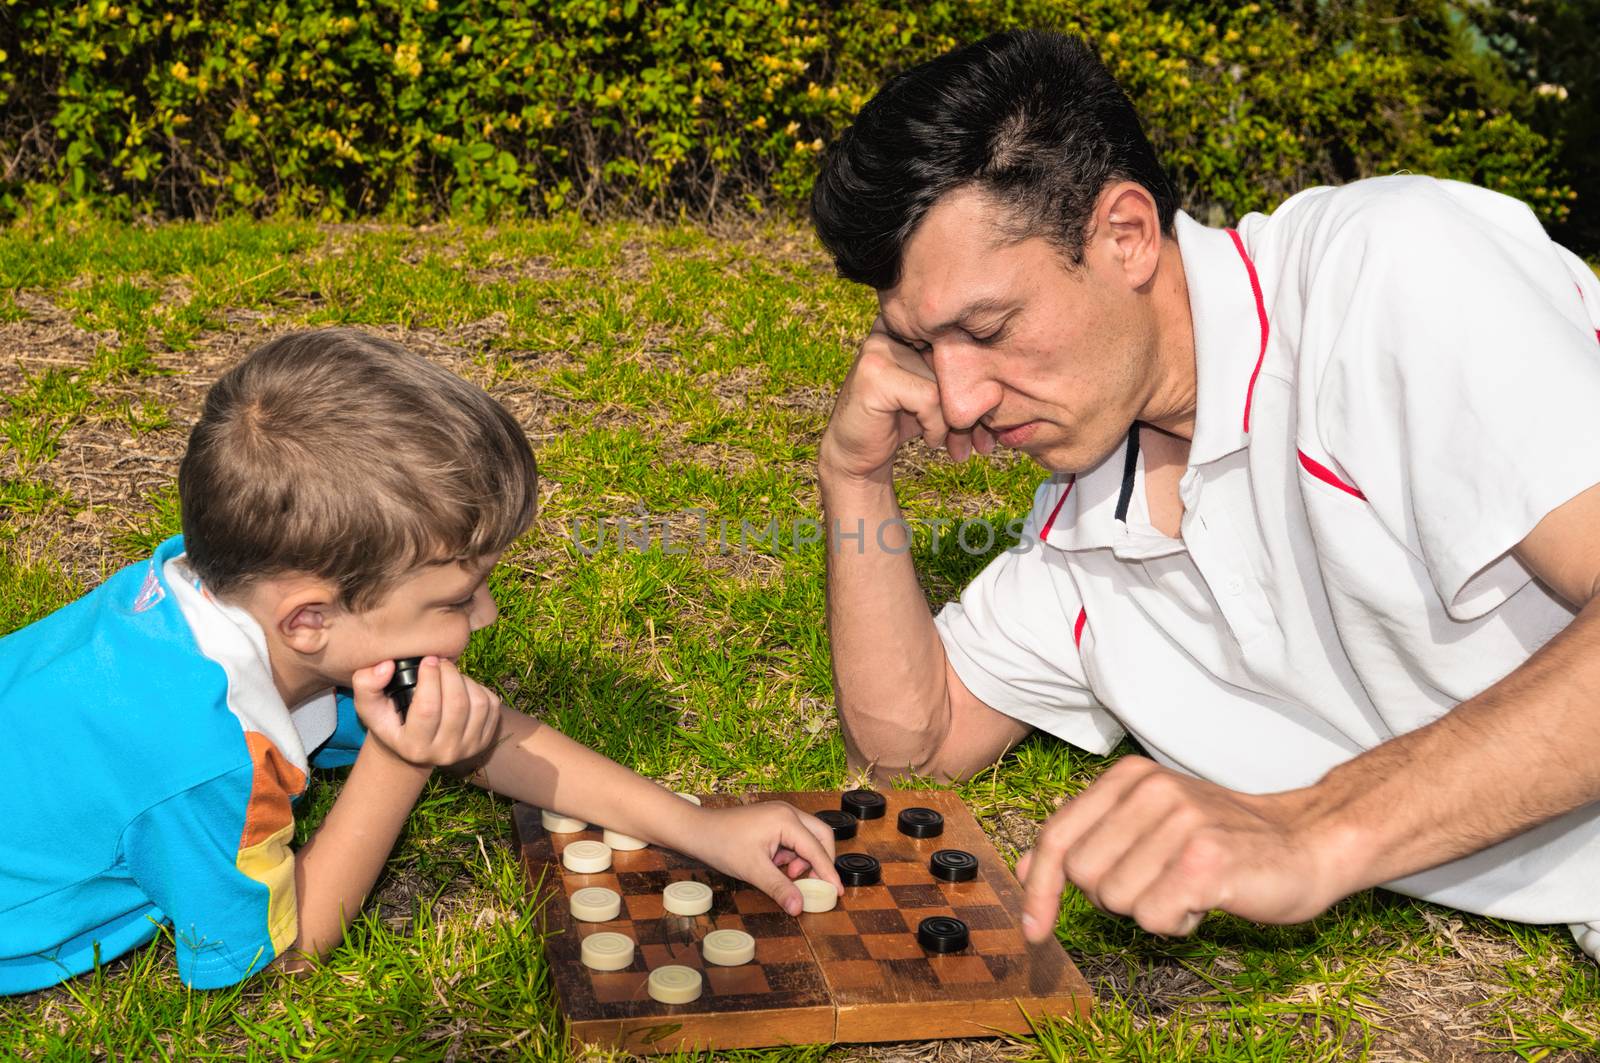 Father and son playing checkers on the grass in a city park